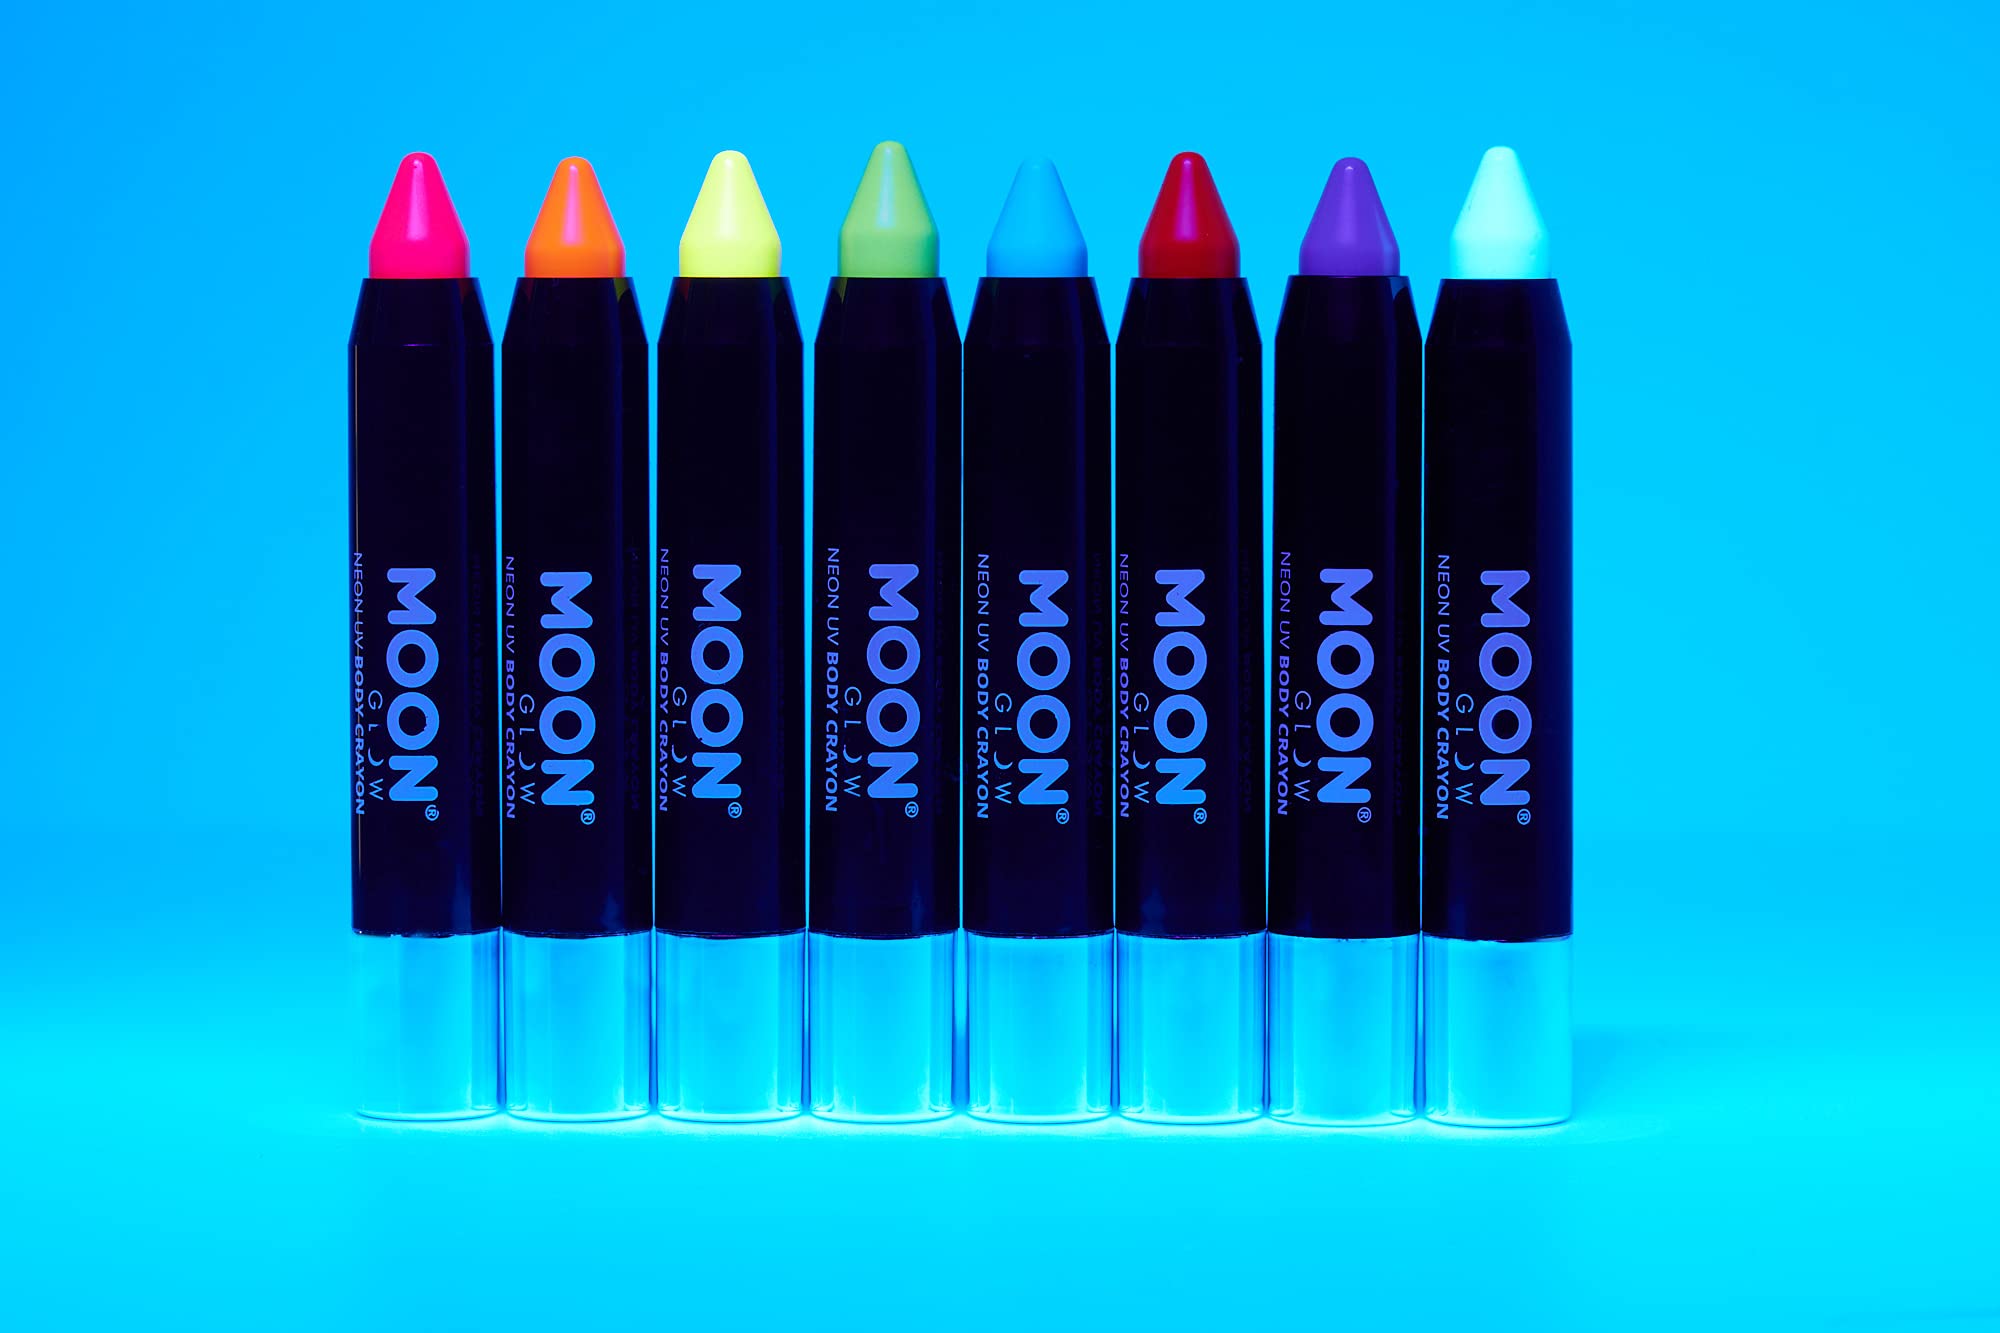 Moon Glow - Blacklight Neon Face Paint Stick/Body Crayon makeup for the Face & Body - Intense set of 8 colours - Glows brightly under blacklights